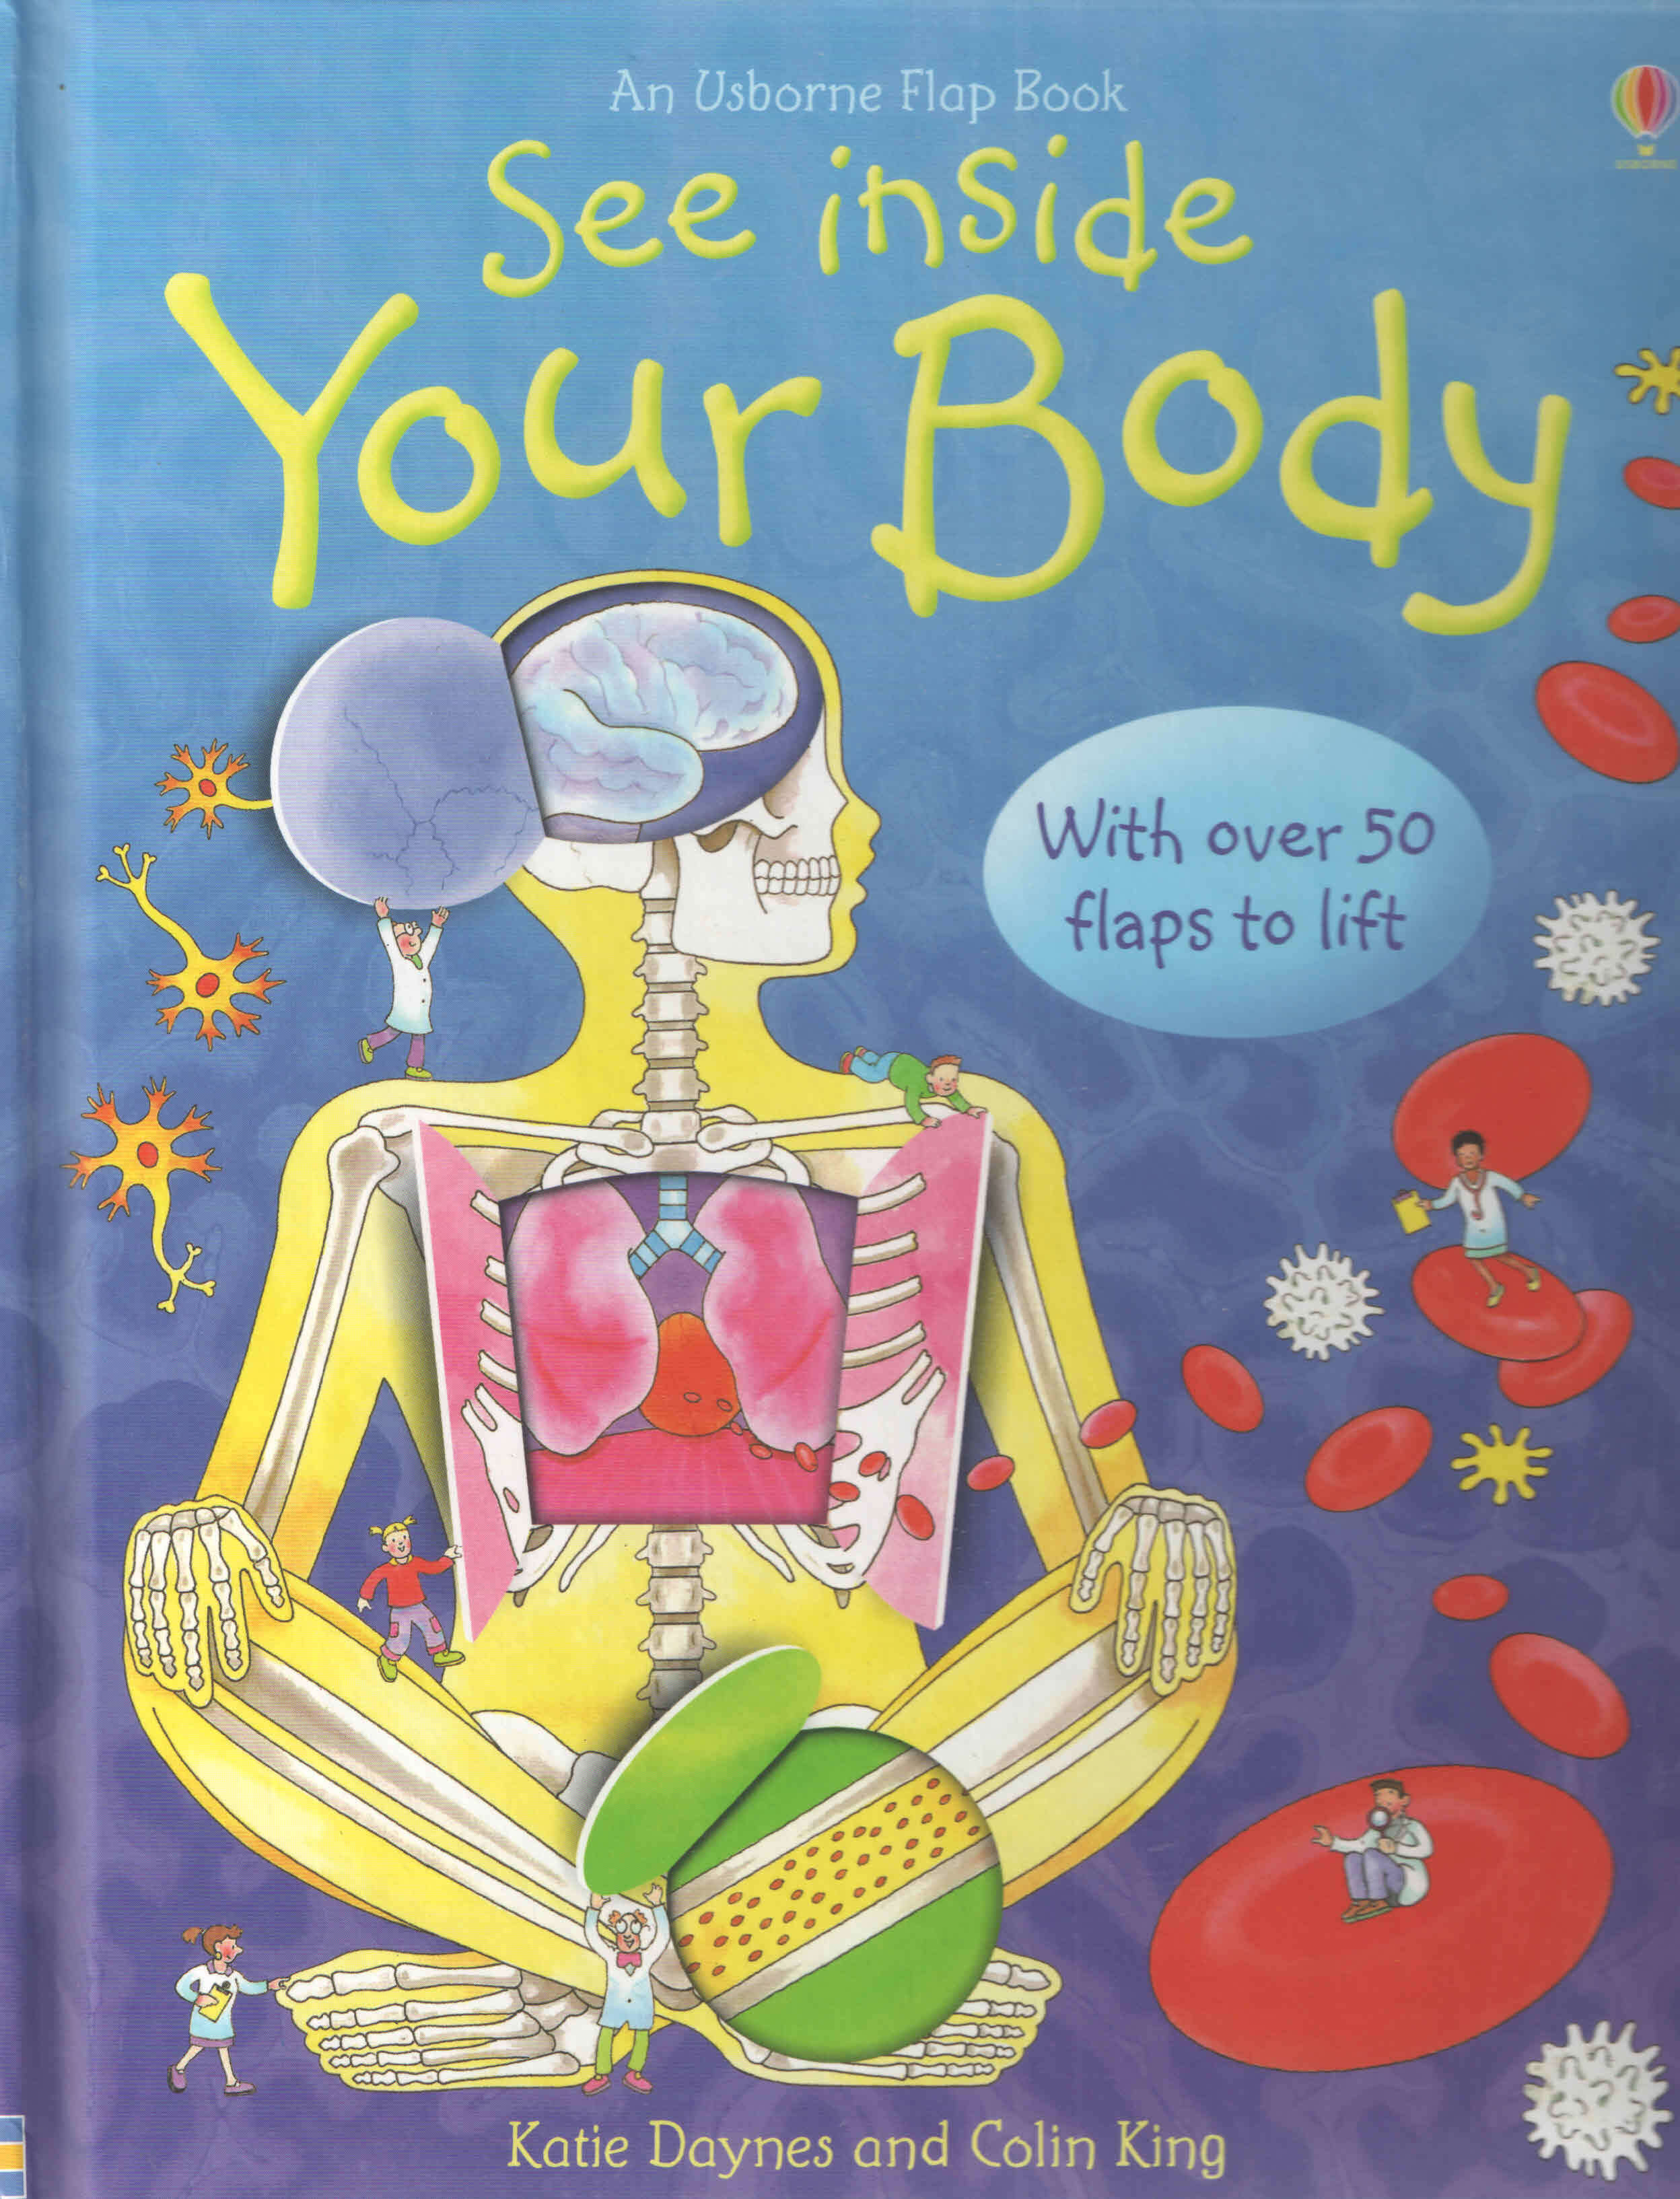 SEE INSIDE YOUR BODY by DK TODAY